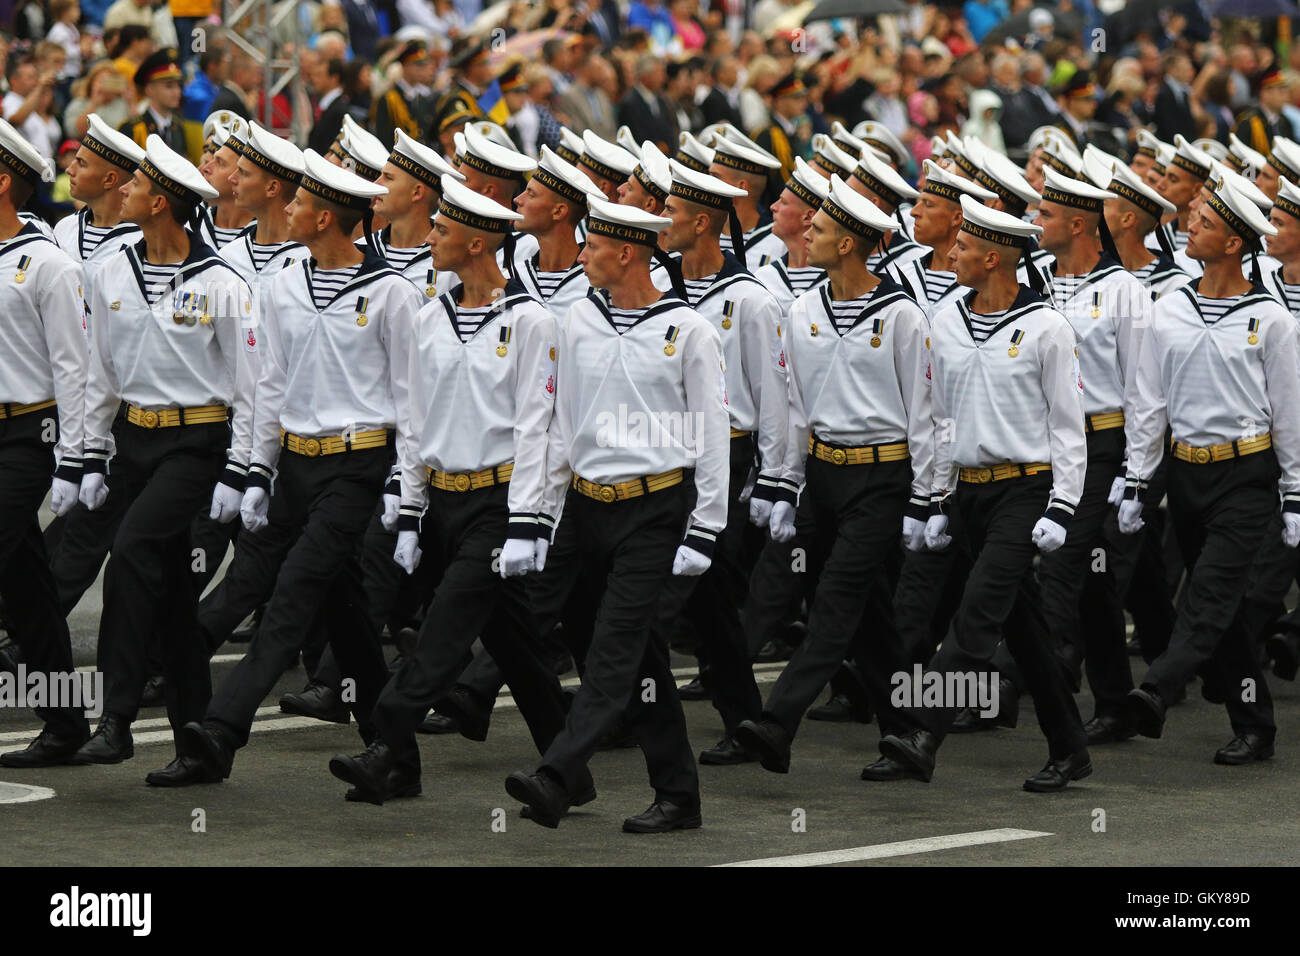 Kiev, Ukraine. 24th August, 2016. Soldiers of the Ukrainian Navy during military parade in Kiev, dedicated to the Independence Day of Ukraine. Ukraine celebrates 25th anniversary of Independence. Credit:  Oleksandr Prykhodko/Alamy Live News Stock Photo